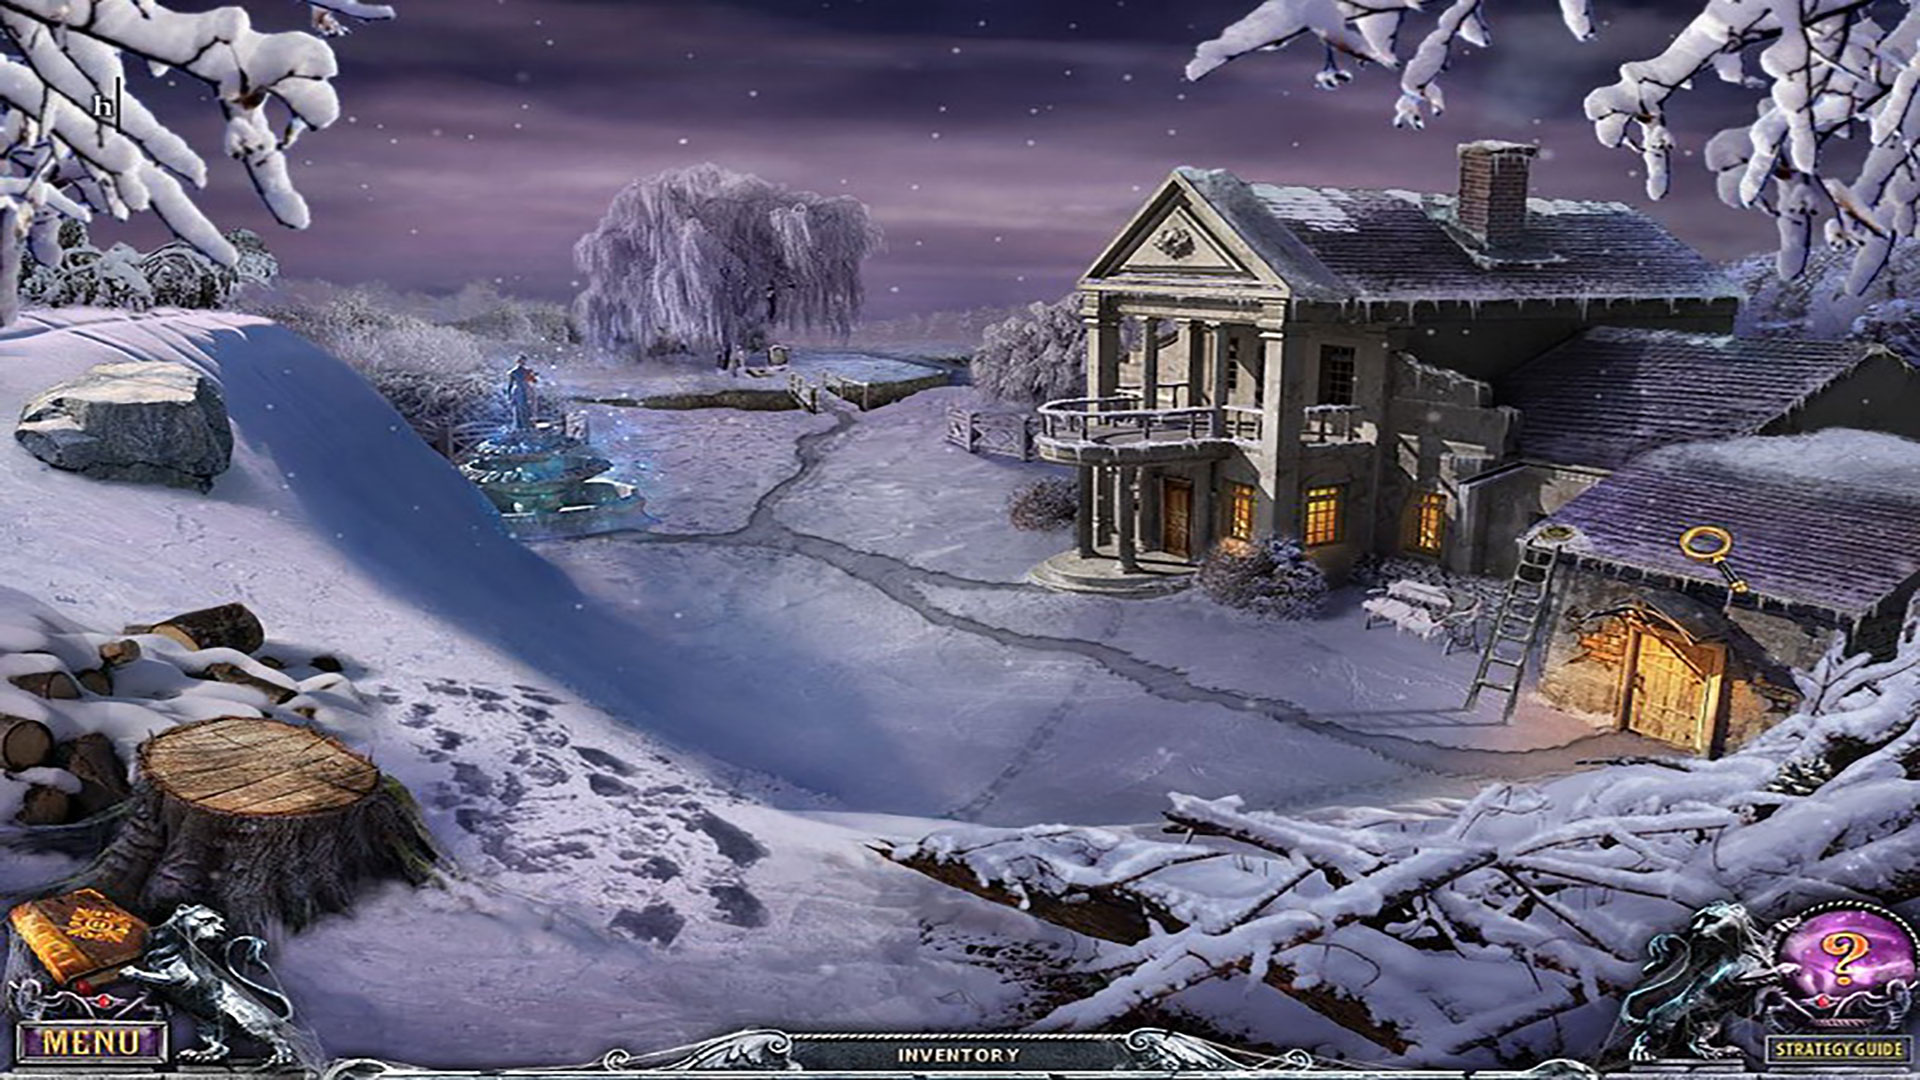 House of 1,000 Doors: Family Secrets Collector's Edition screenshot